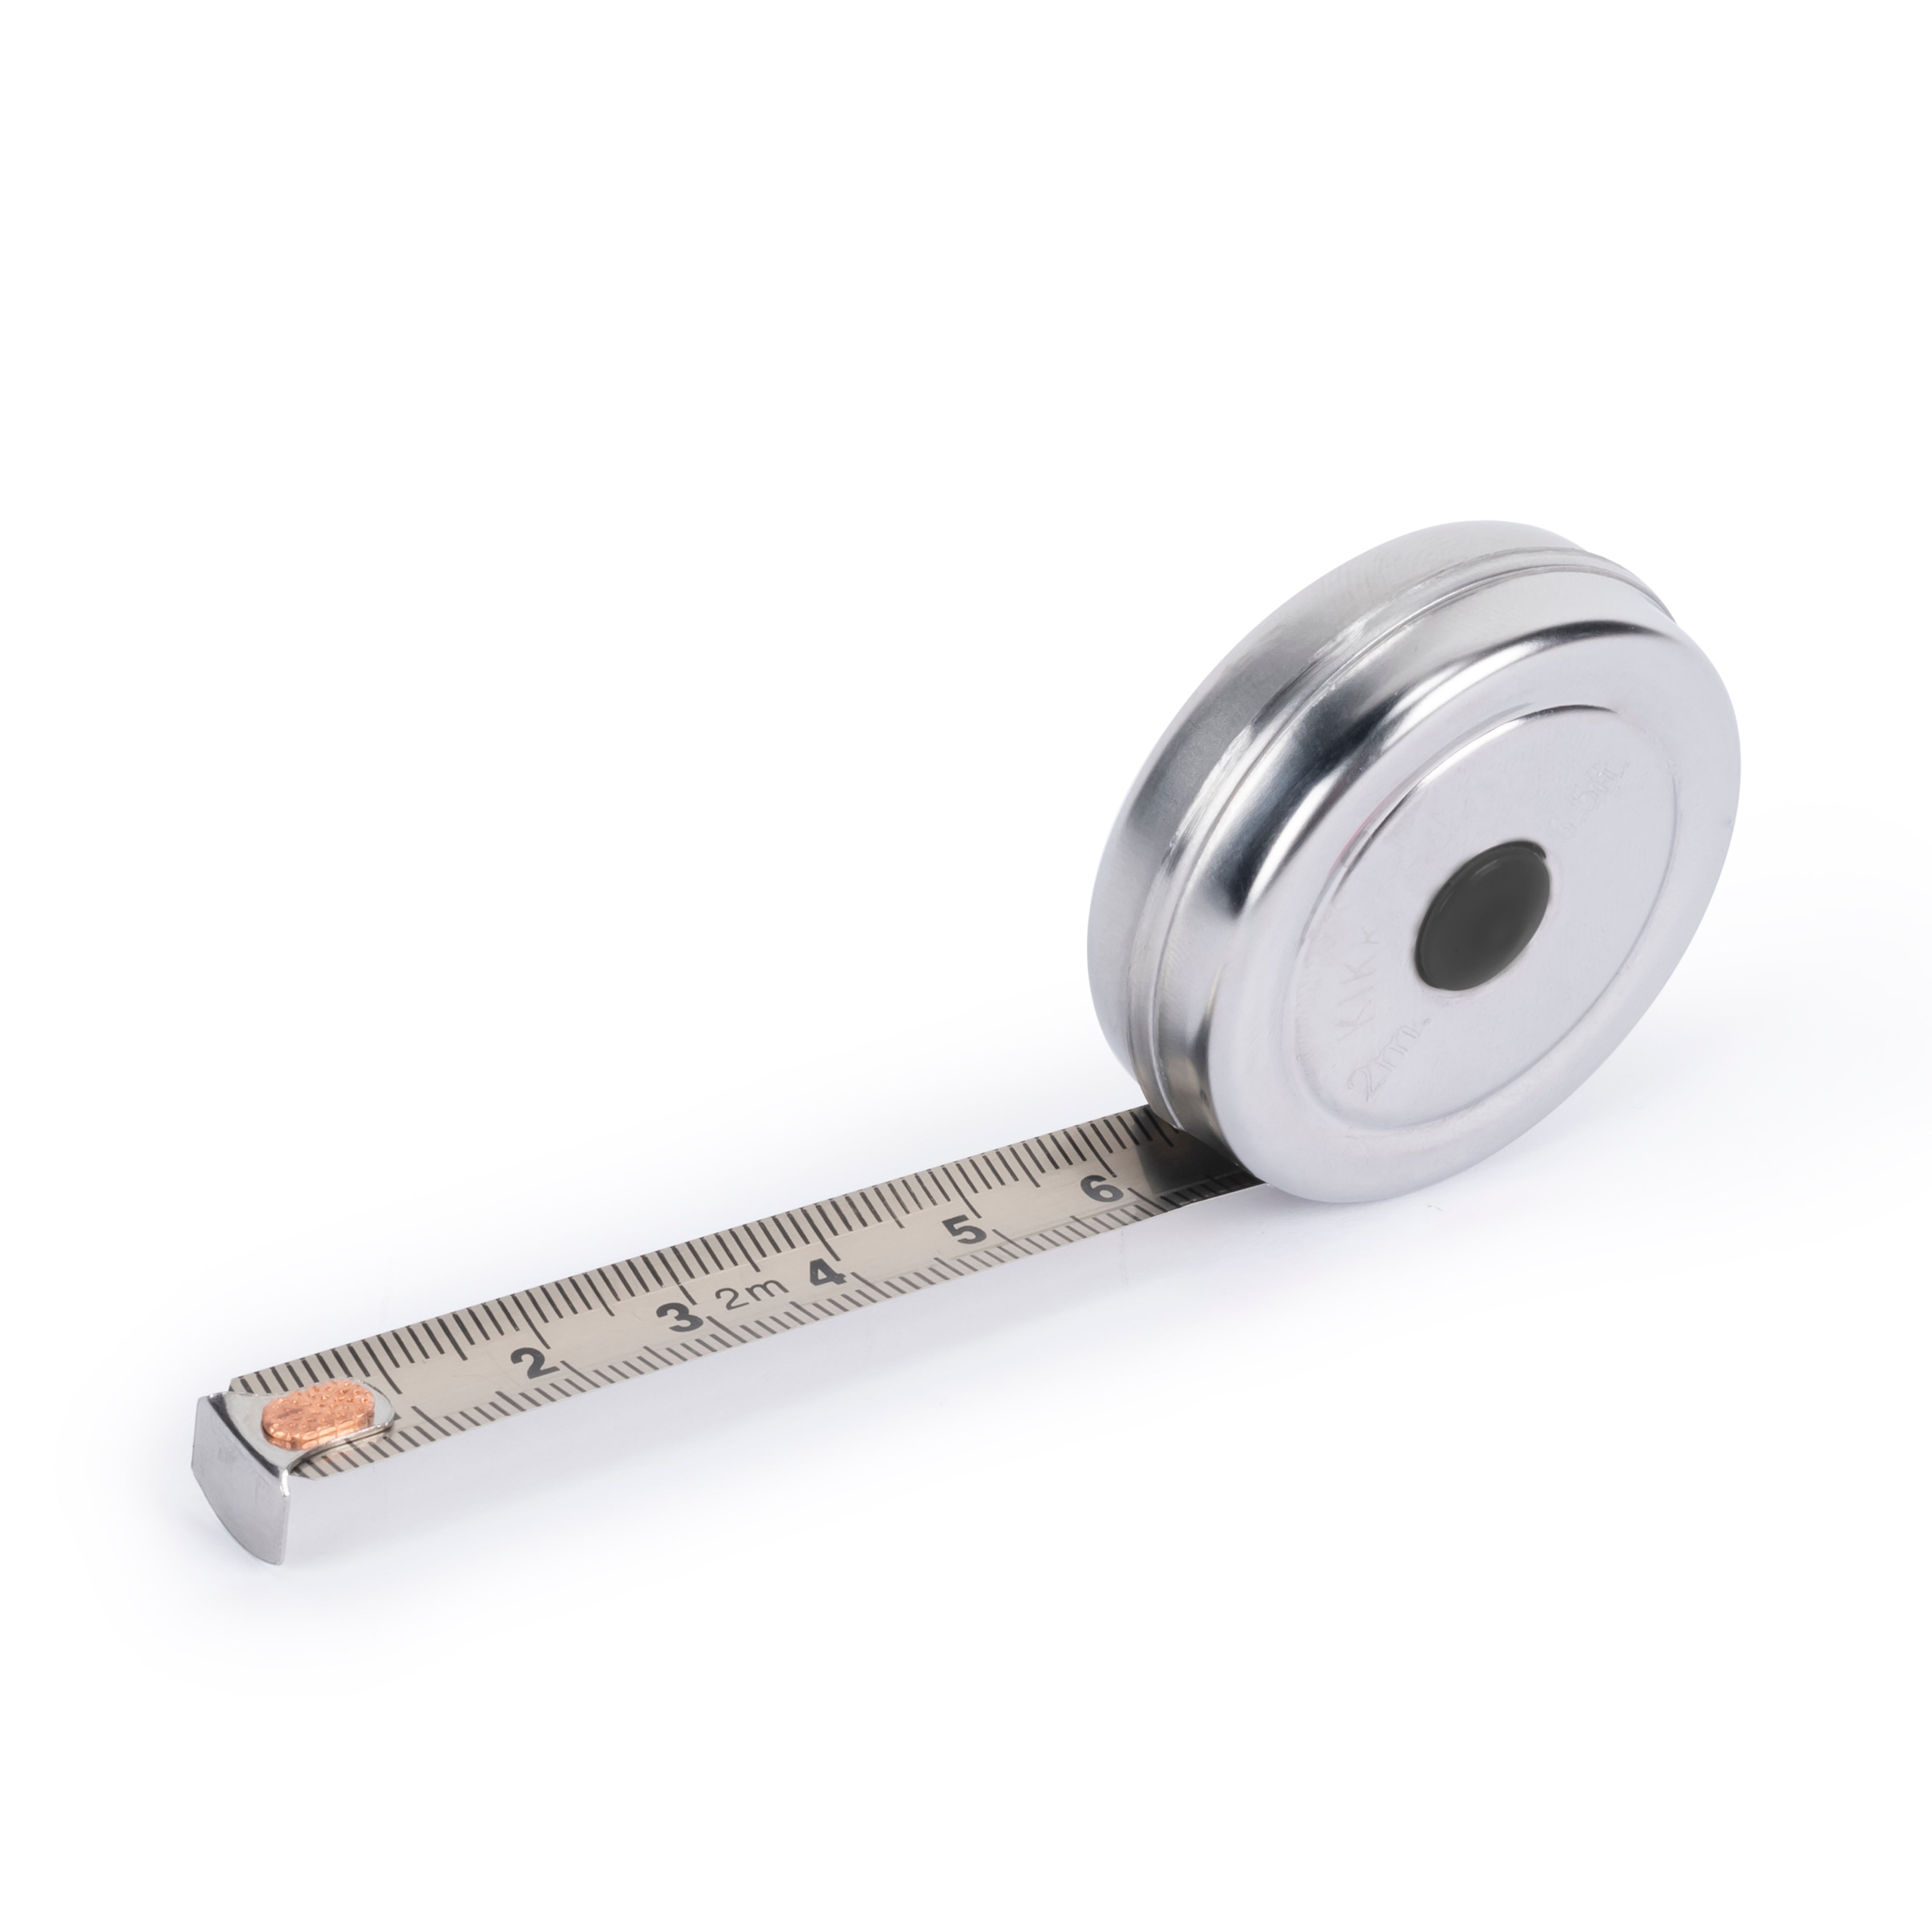 MABIS Tape Measure Measuring Tape for Body, Pocket Size Compact Retractable  Flexible, 60 inches, White - Walmart.com